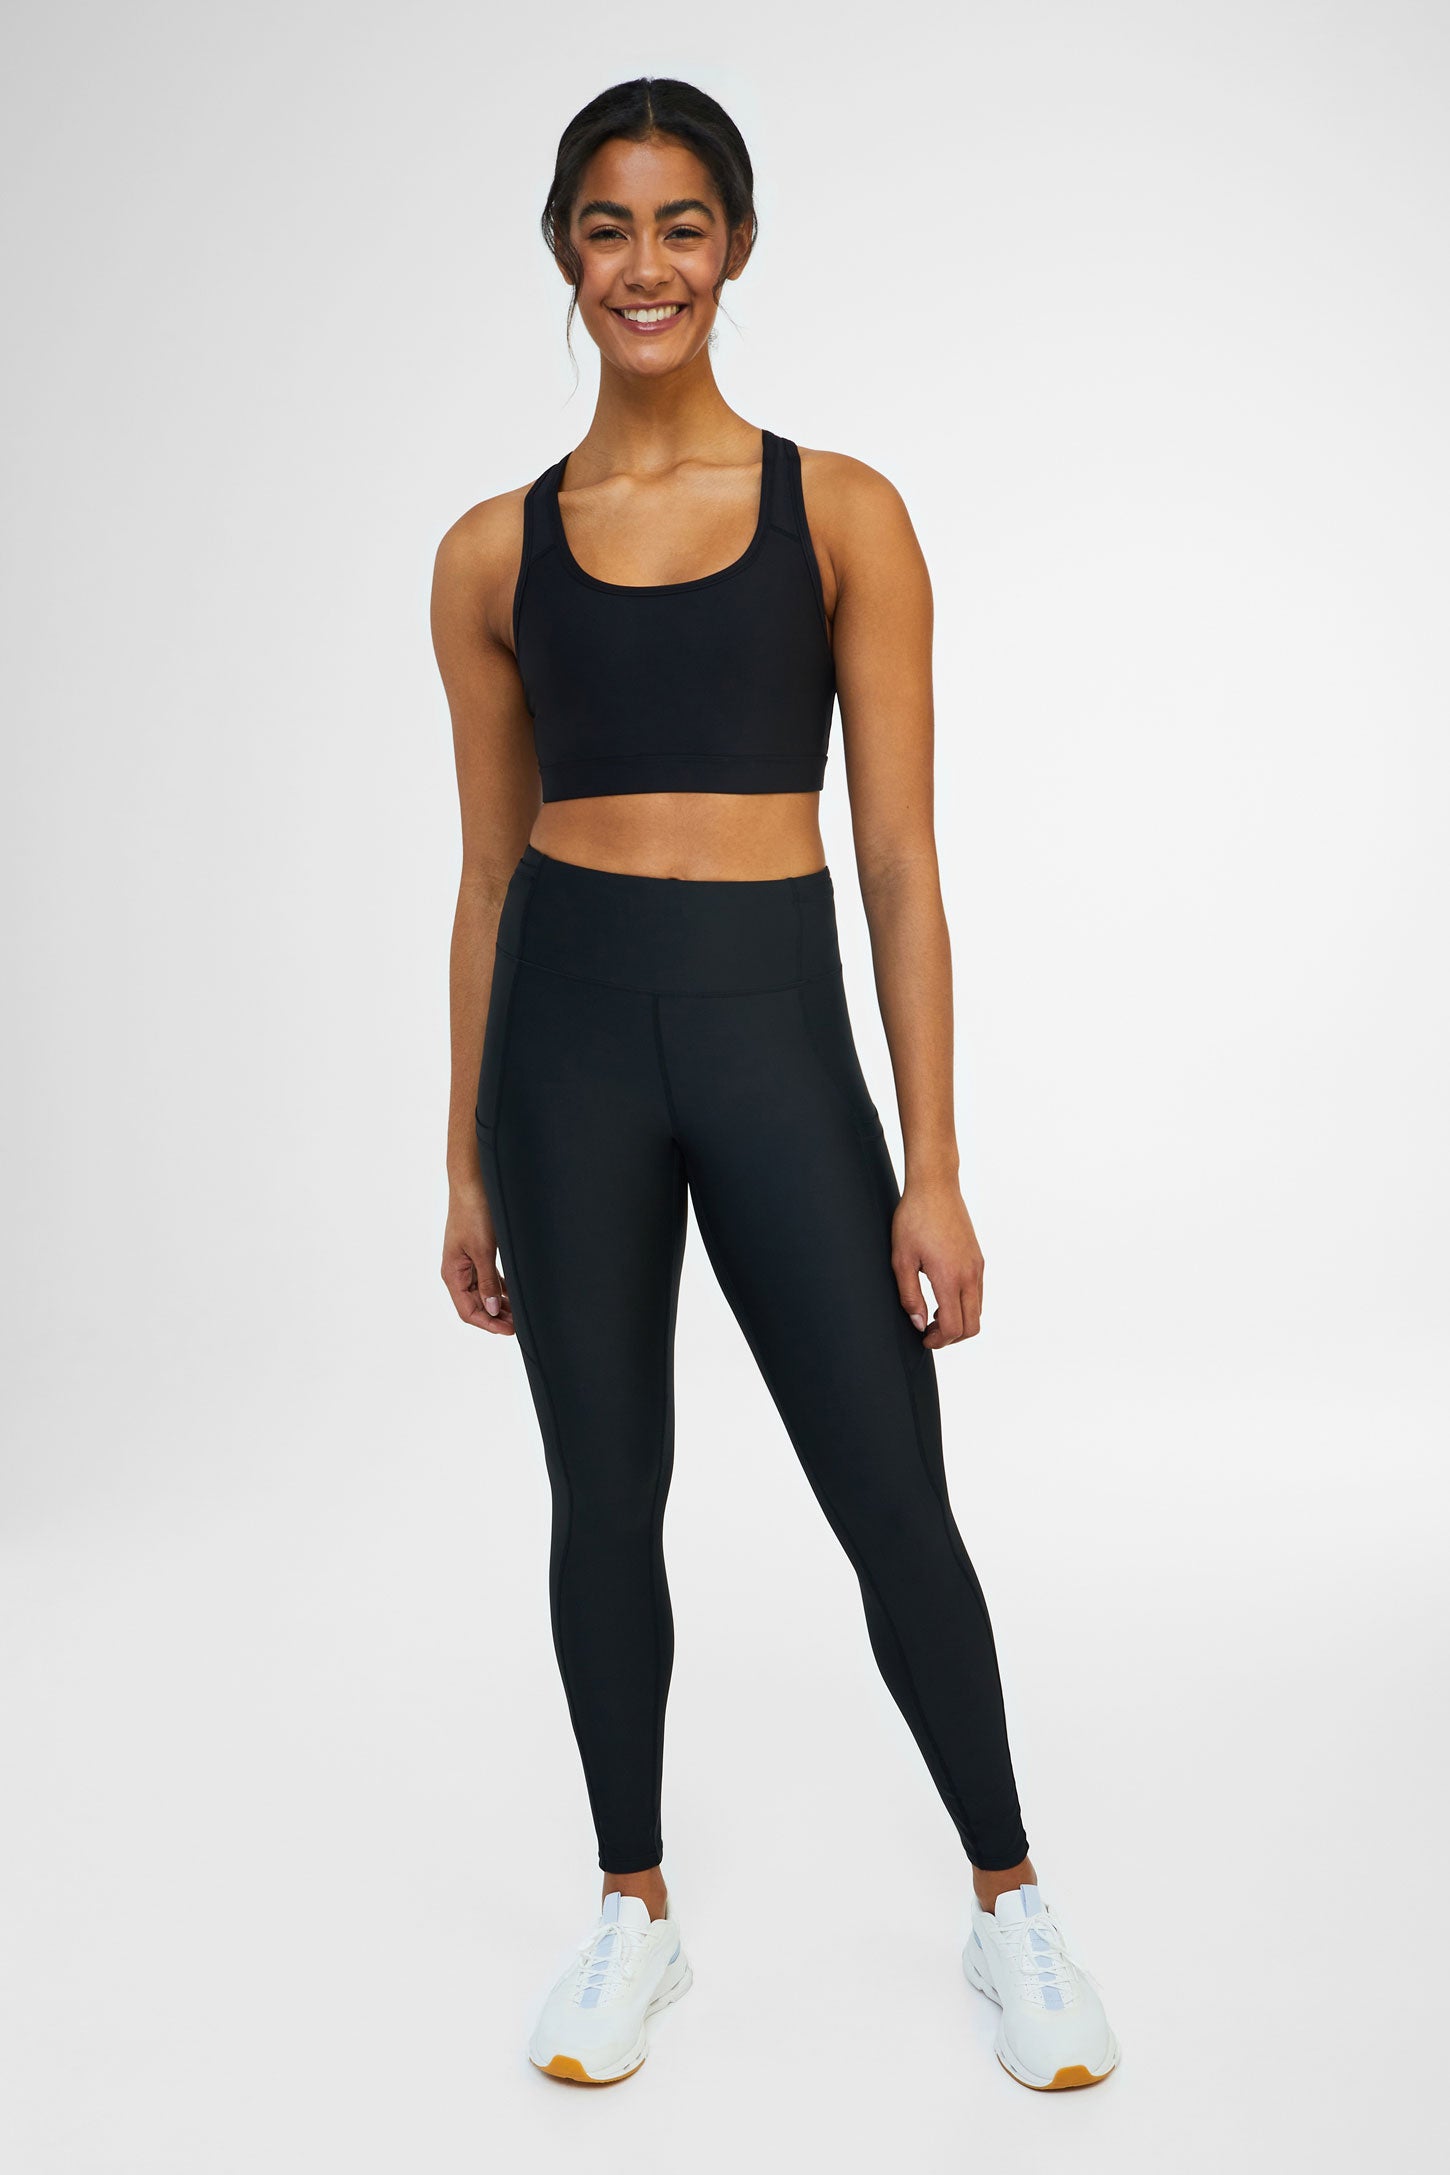  BECLOH Womens Workout Leggings 25 / 28 - Thick High